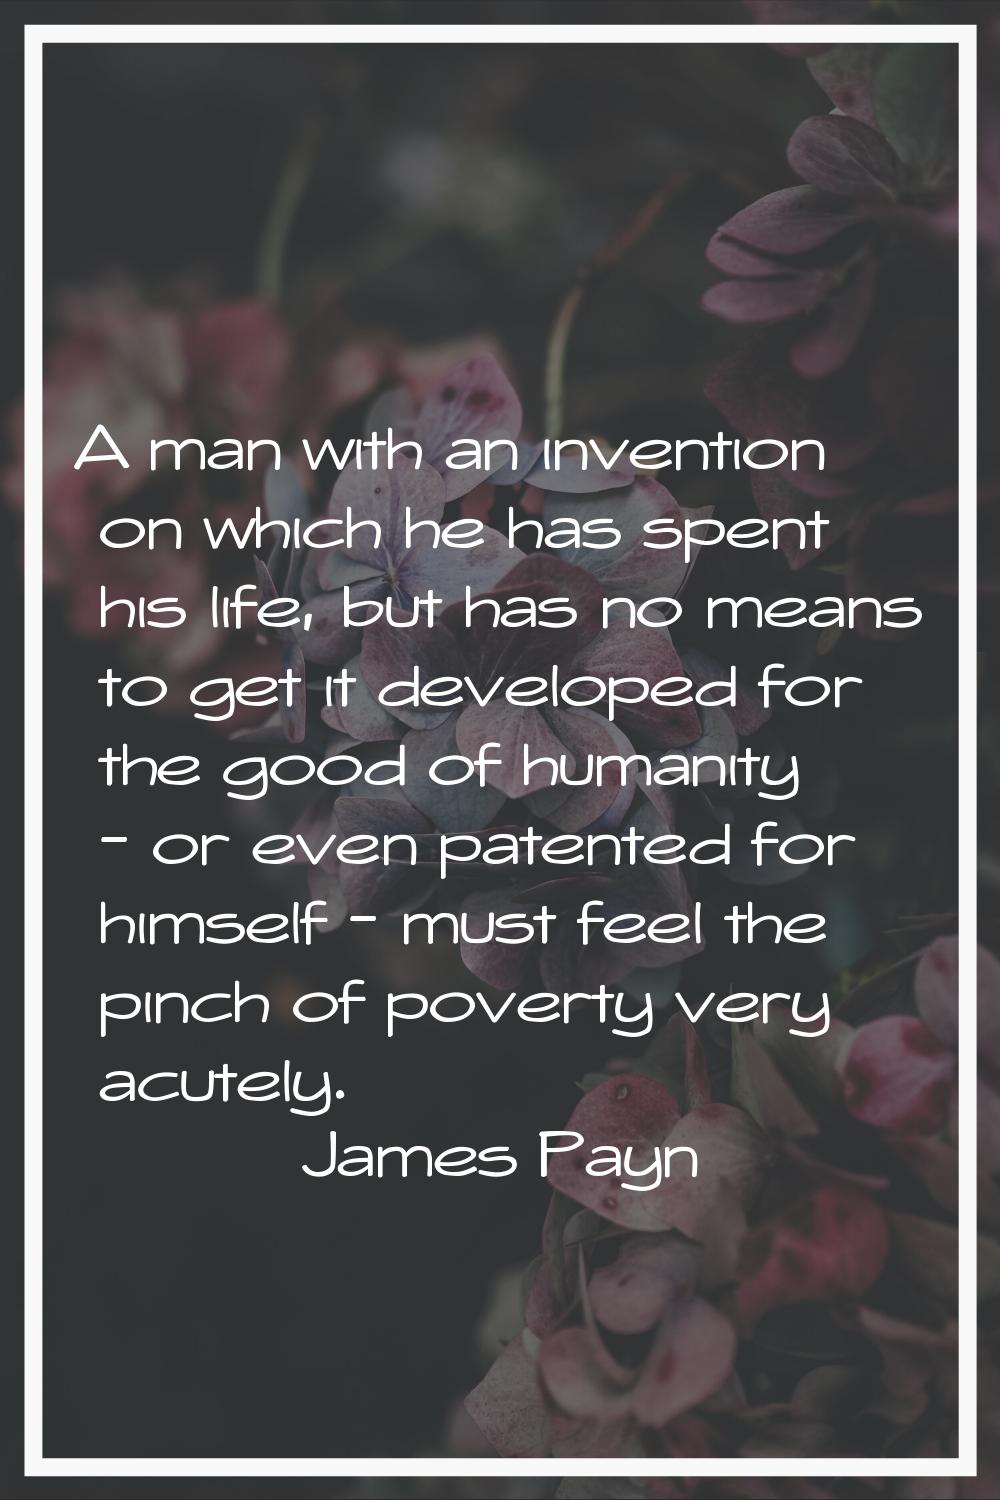 A man with an invention on which he has spent his life, but has no means to get it developed for th